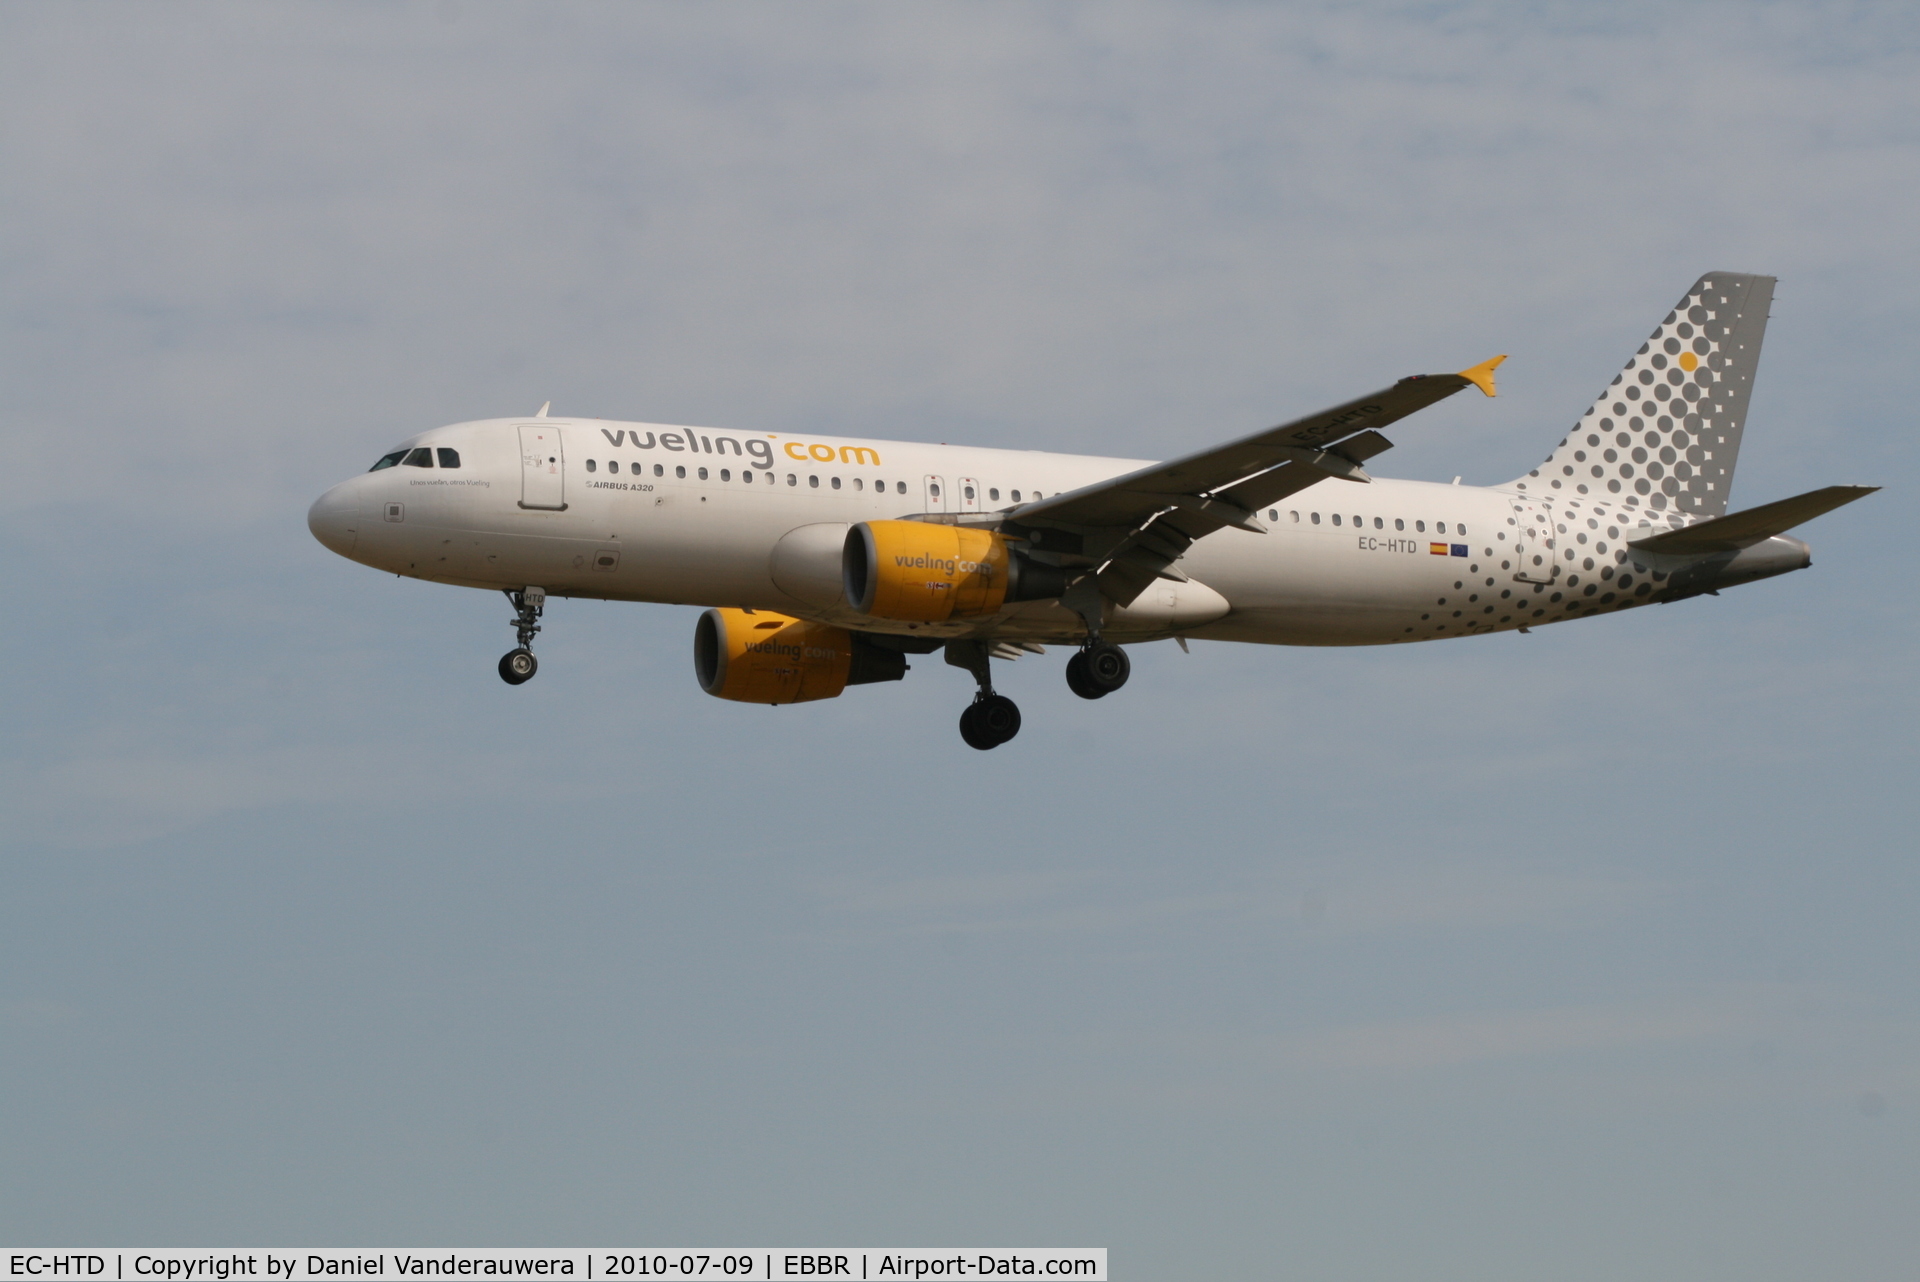 EC-HTD, 2001 Airbus A320-214 C/N 1550, Arrival of flight VY8988 to RWY 25L